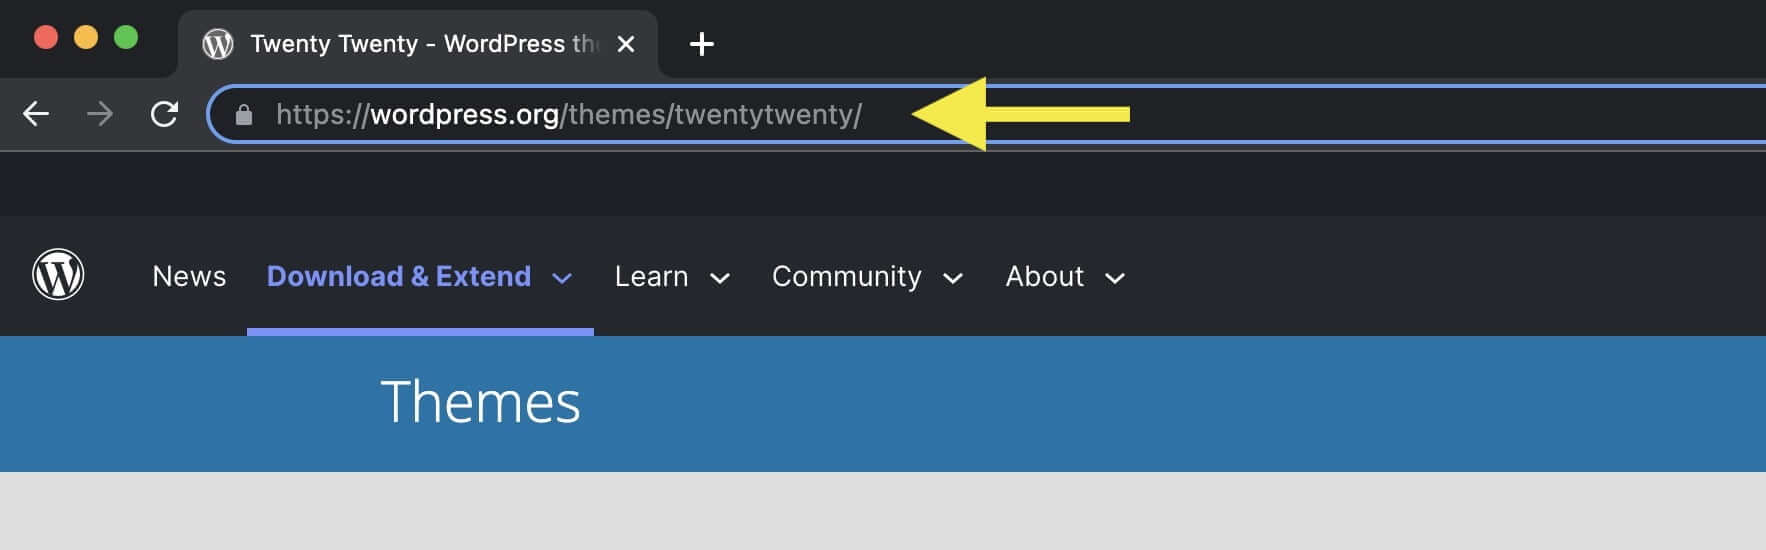 URL of an example theme in the address bar of the browser